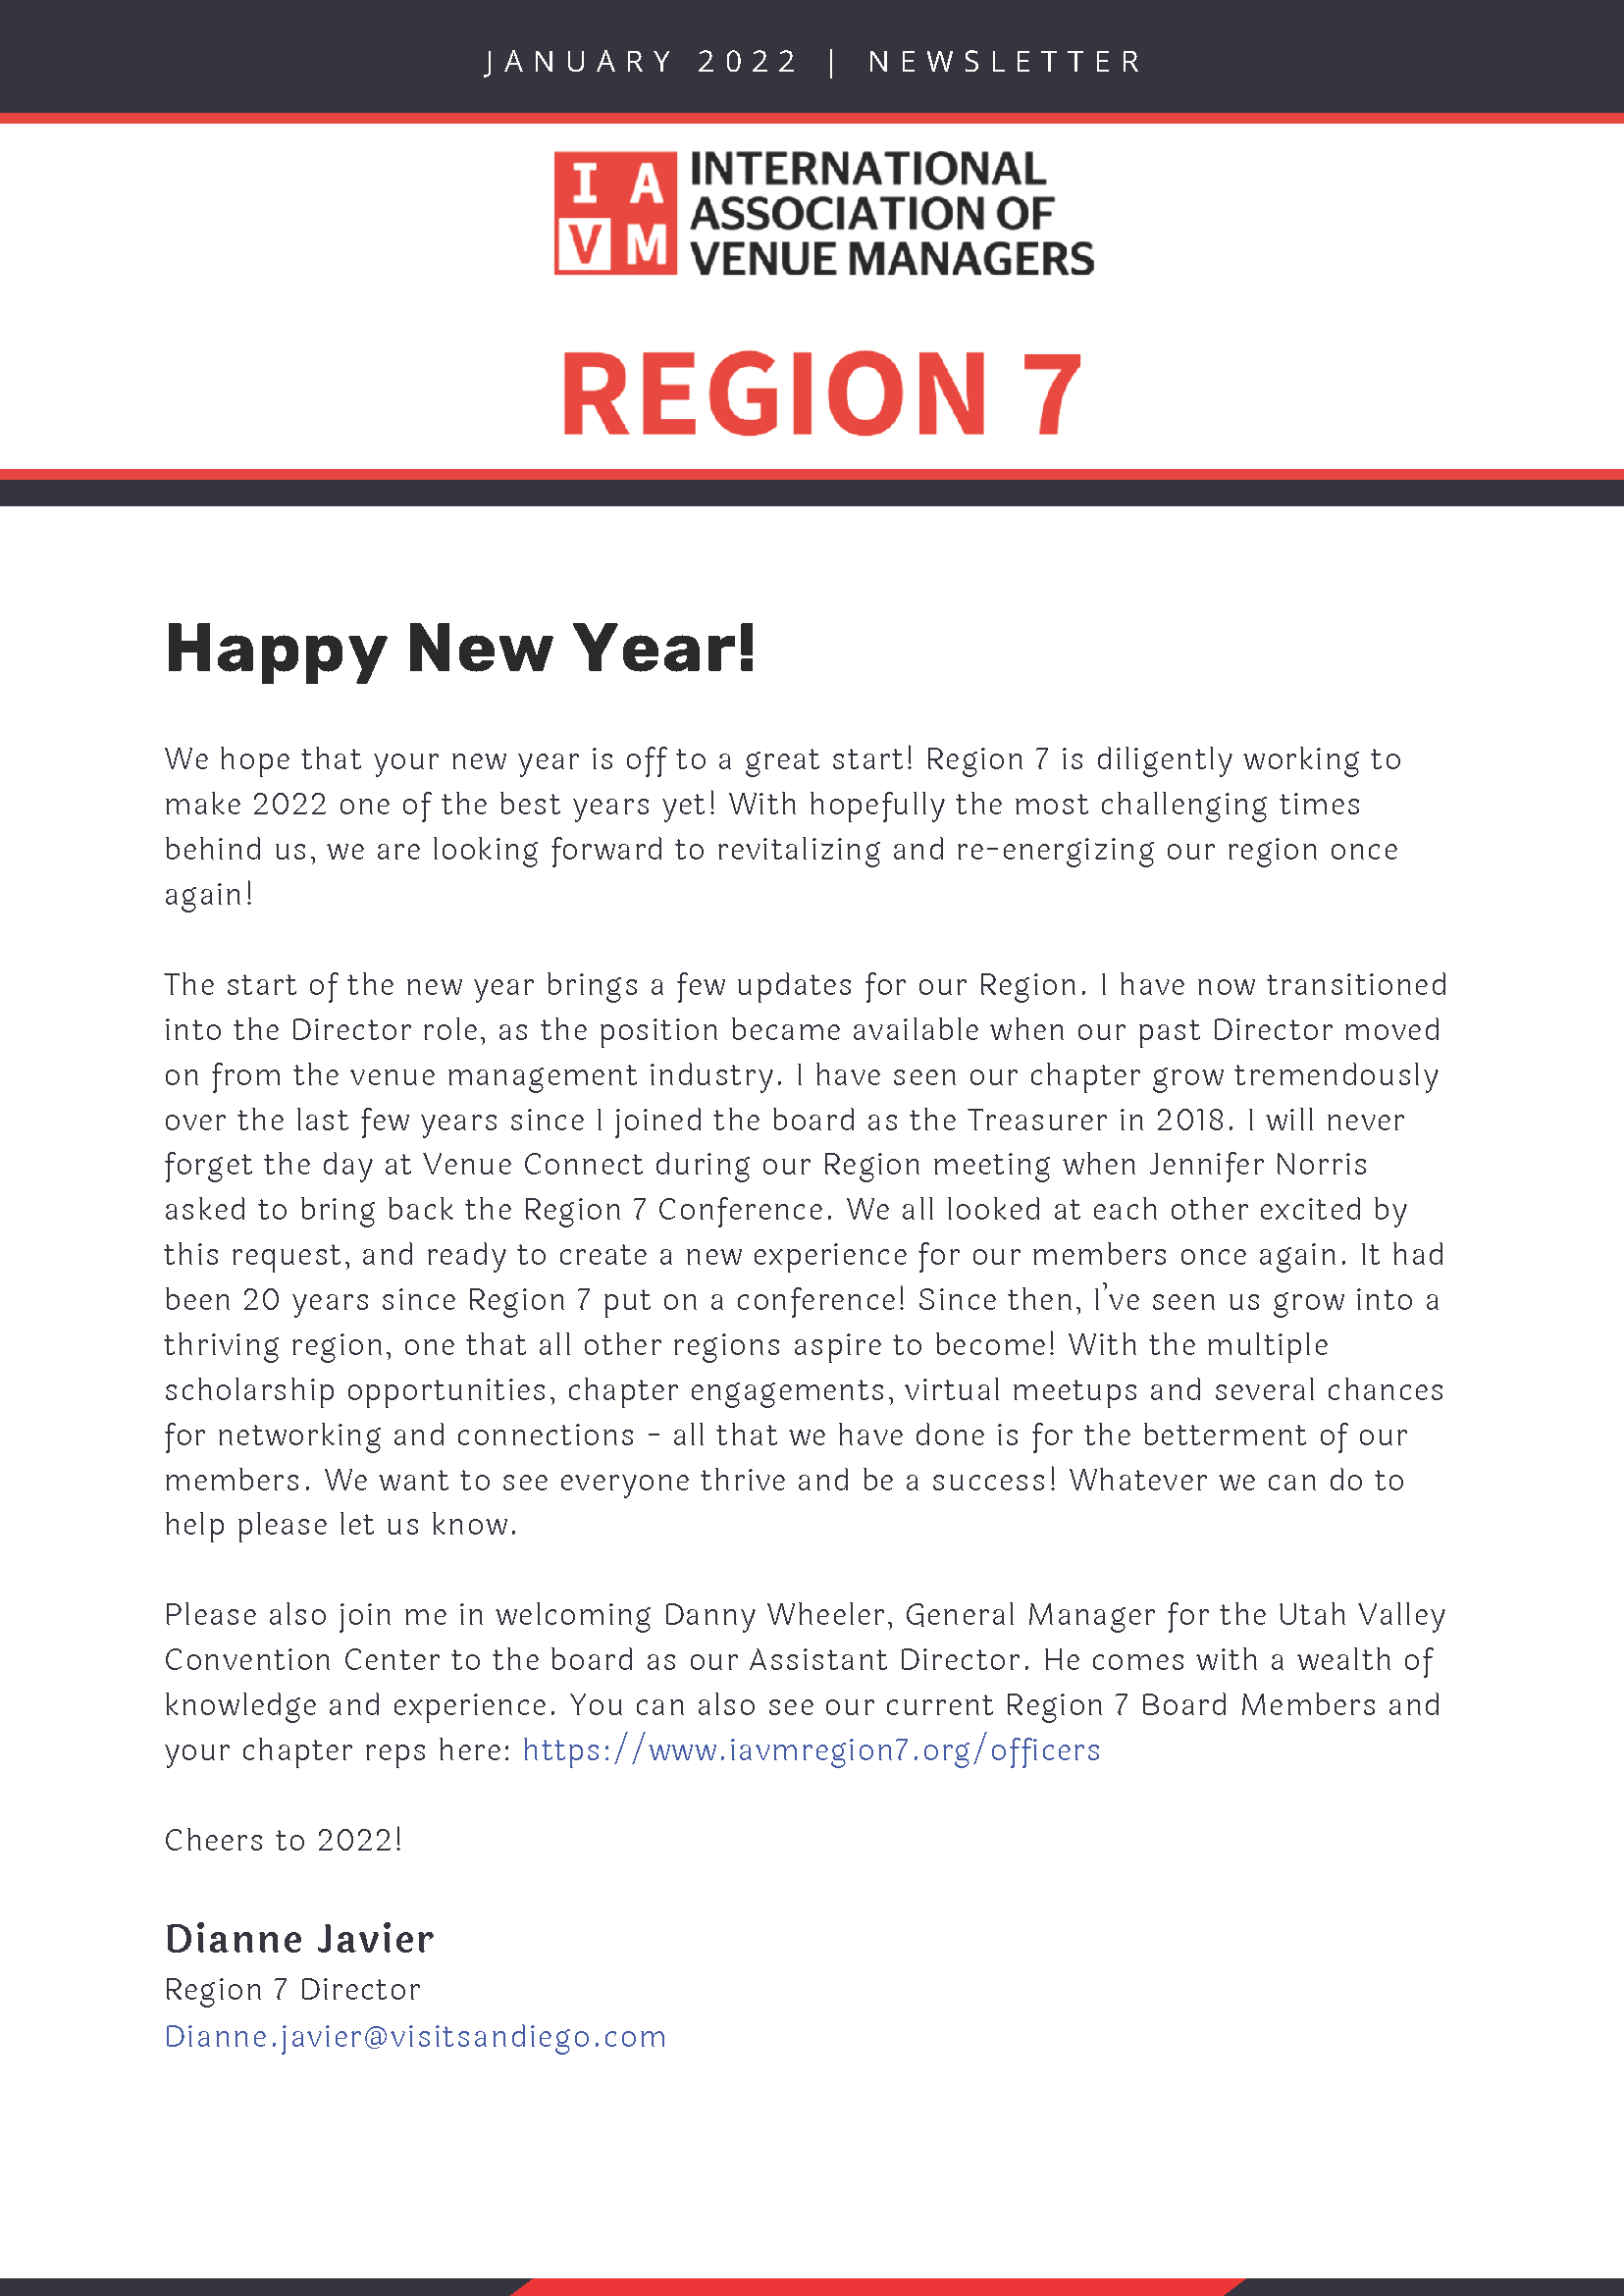 IAVM January Newsletter_Page_1.png